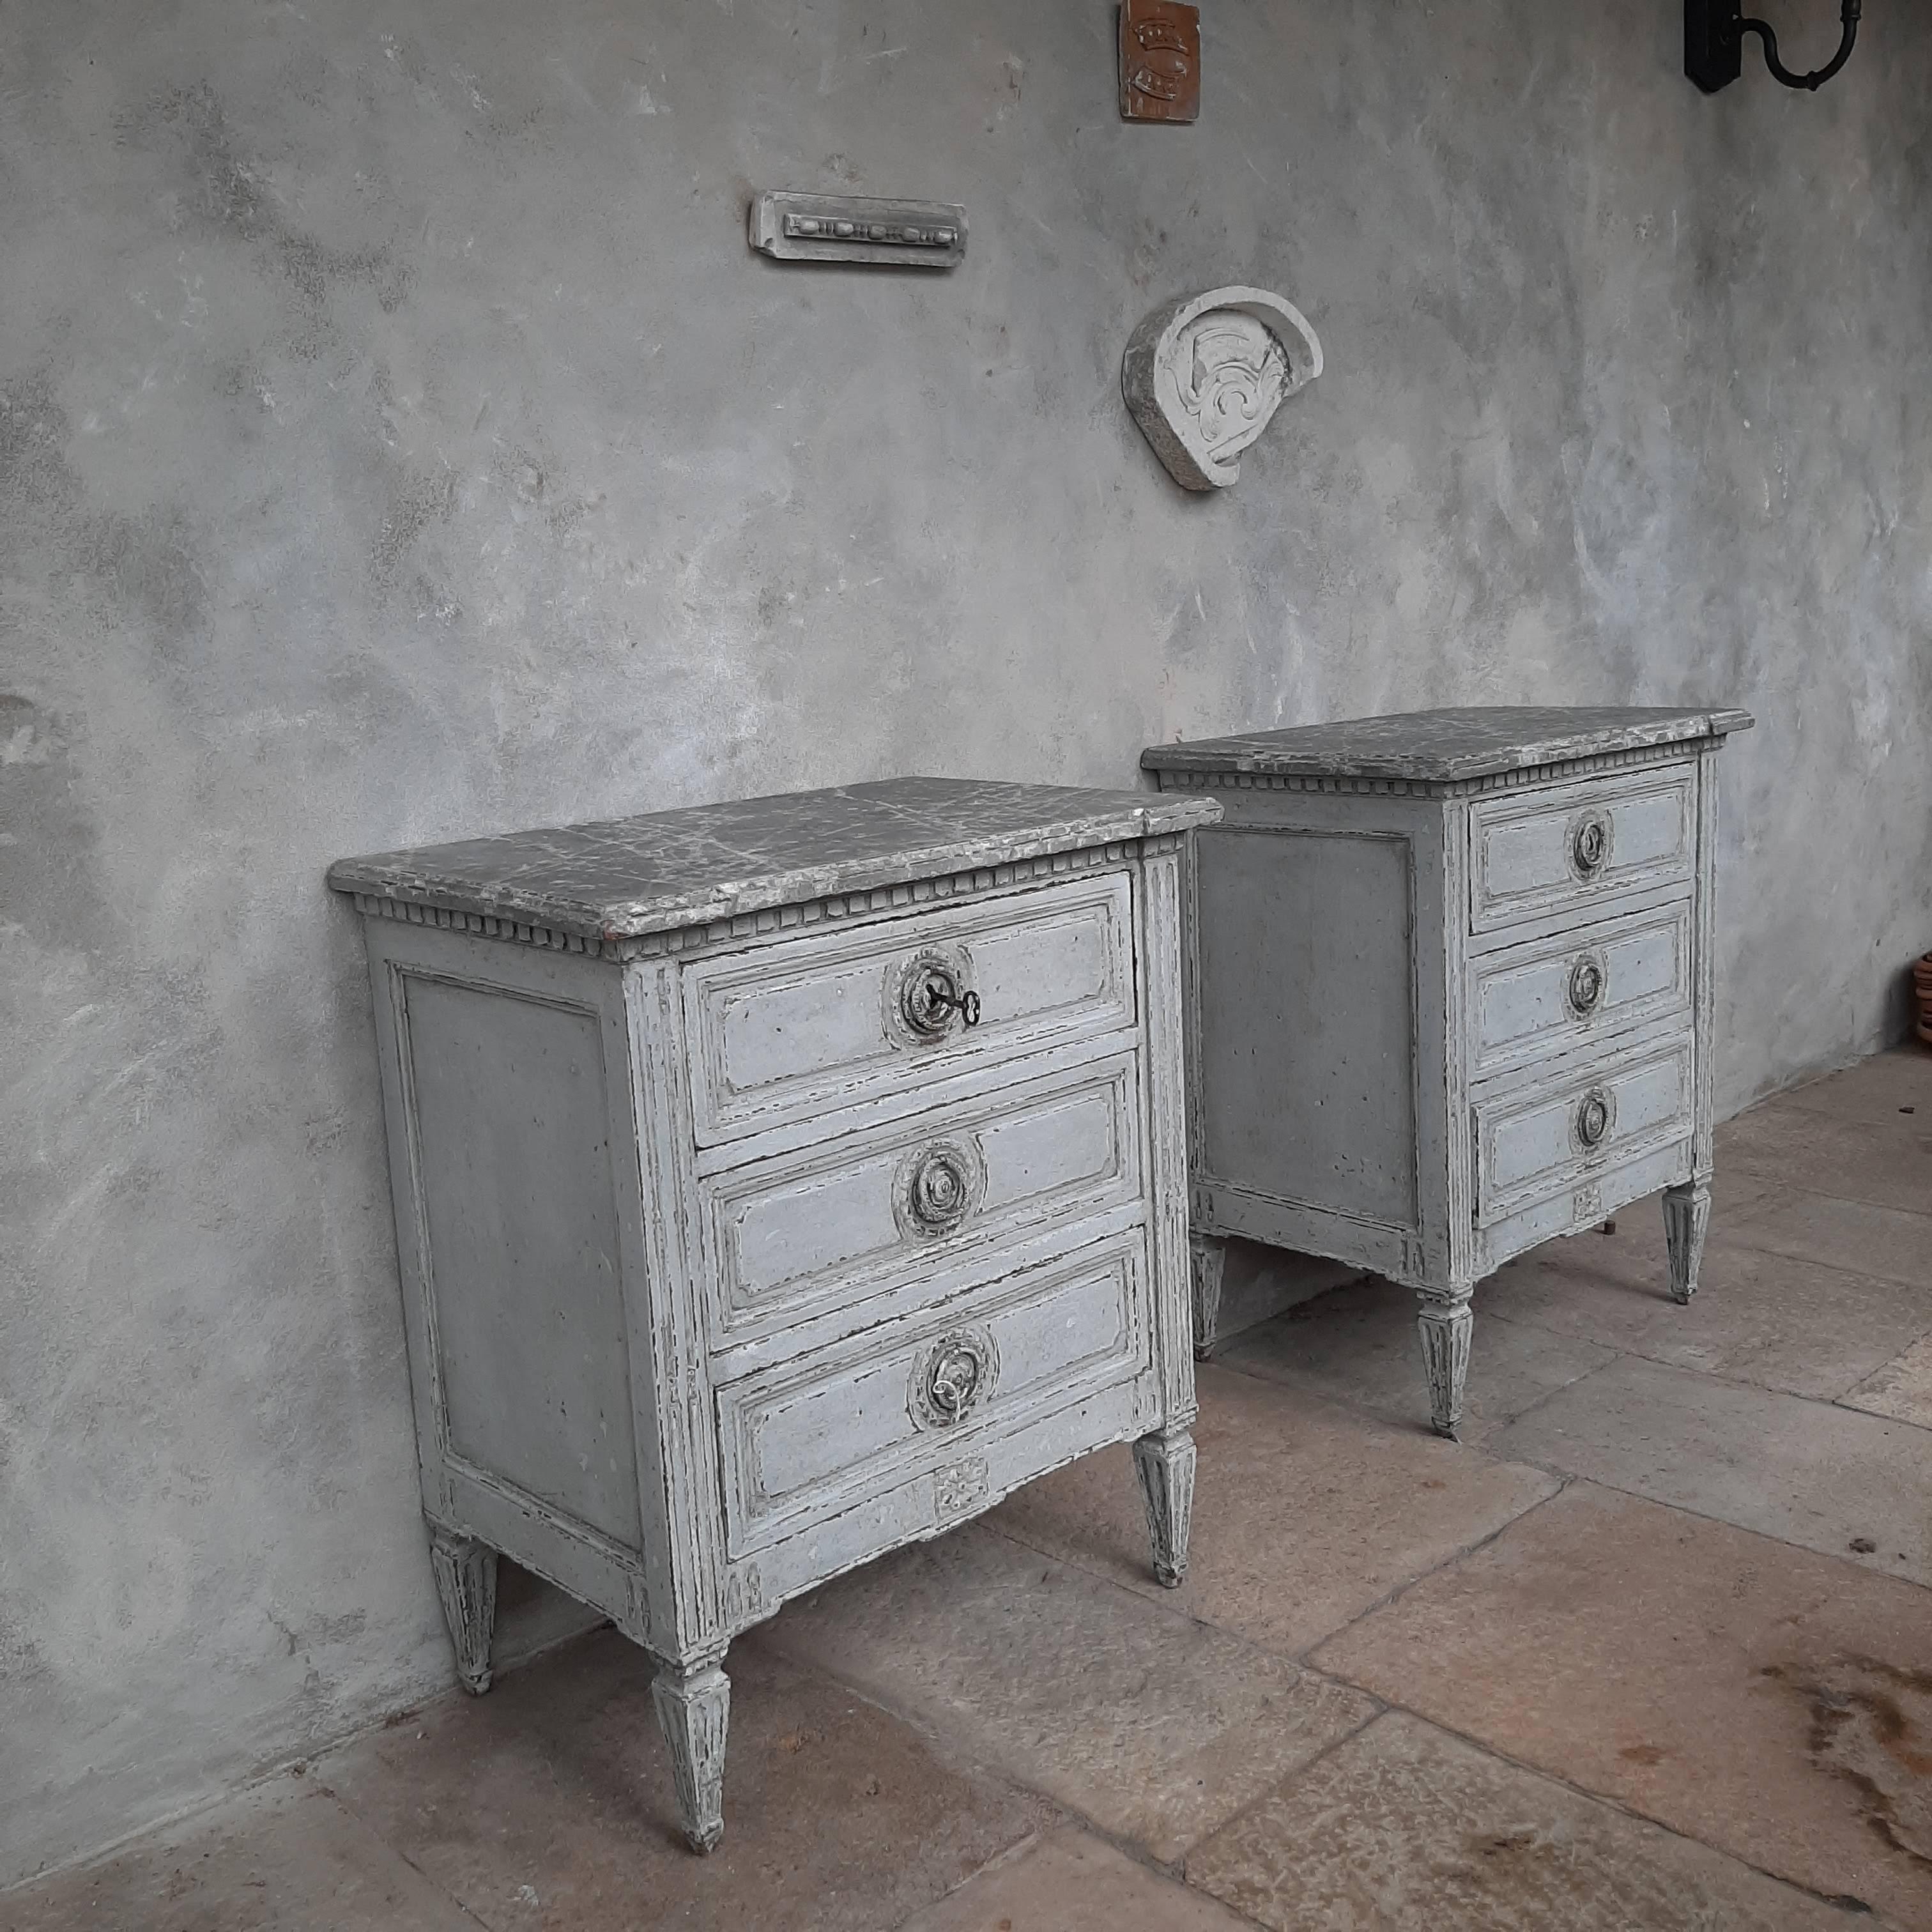 Set of 2 beautiful antique chest of drawers from the 19th century, in Louis XVI style. These bedside tables or cabinets are made of oak and are finished in a beautiful aged grey patina with on the tops a marble look finish. The inside of the drawers